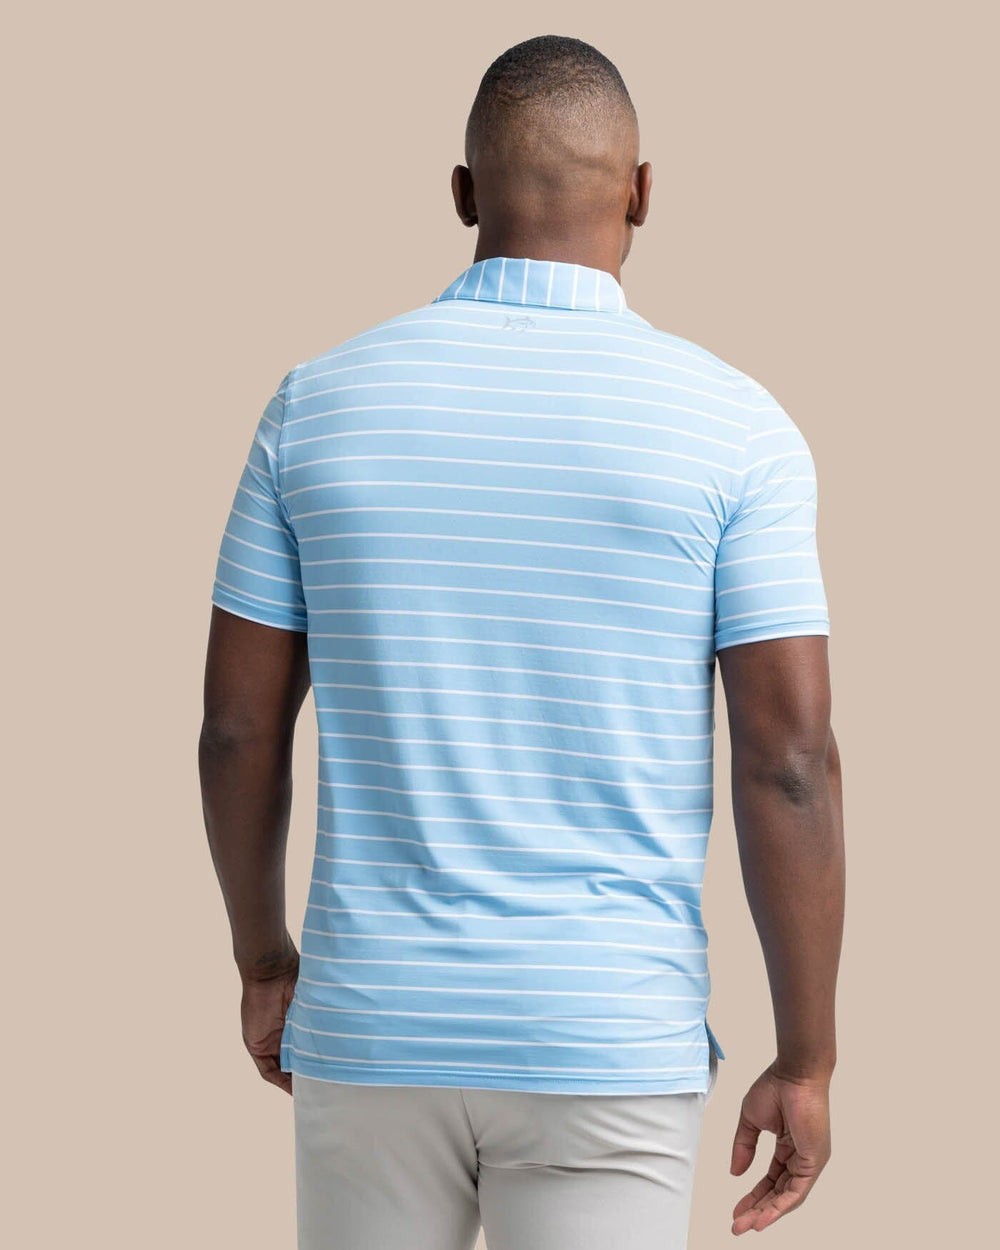 The back view of the Southern Tide brrr-eeze Desmond Stripe Performance Polo by Southern Tide - Rush Blue